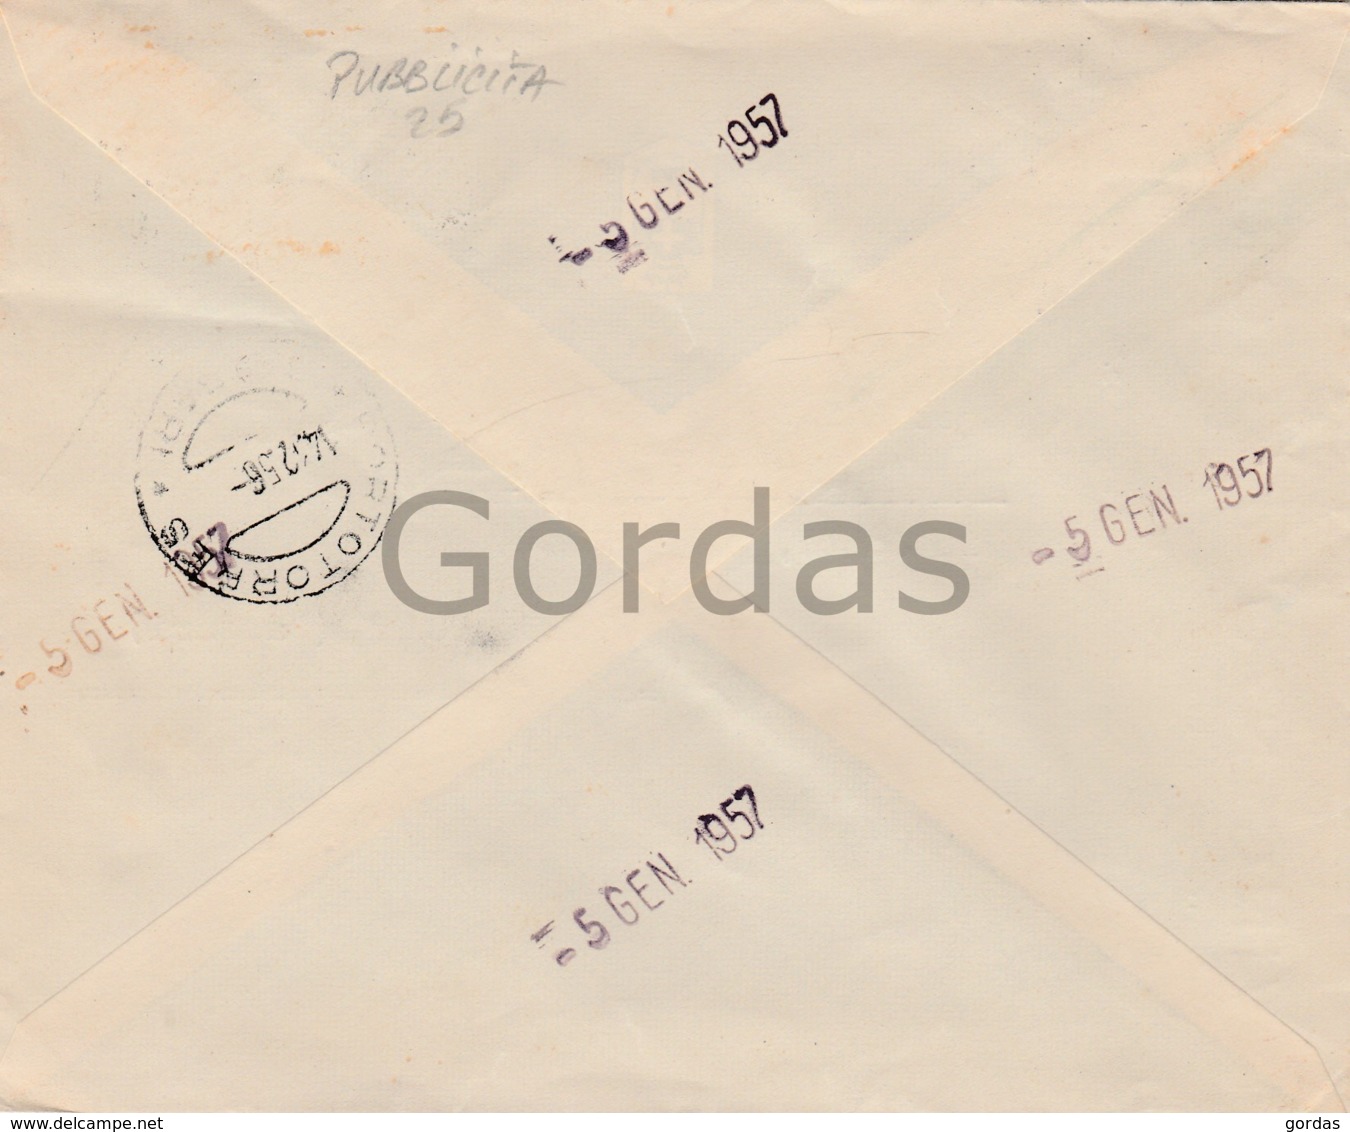 Italy - Torino - Vicenzo D'Ettore Advertise - Envelope - 150x125mm - Publicita - Cafes, Hotels & Restaurants